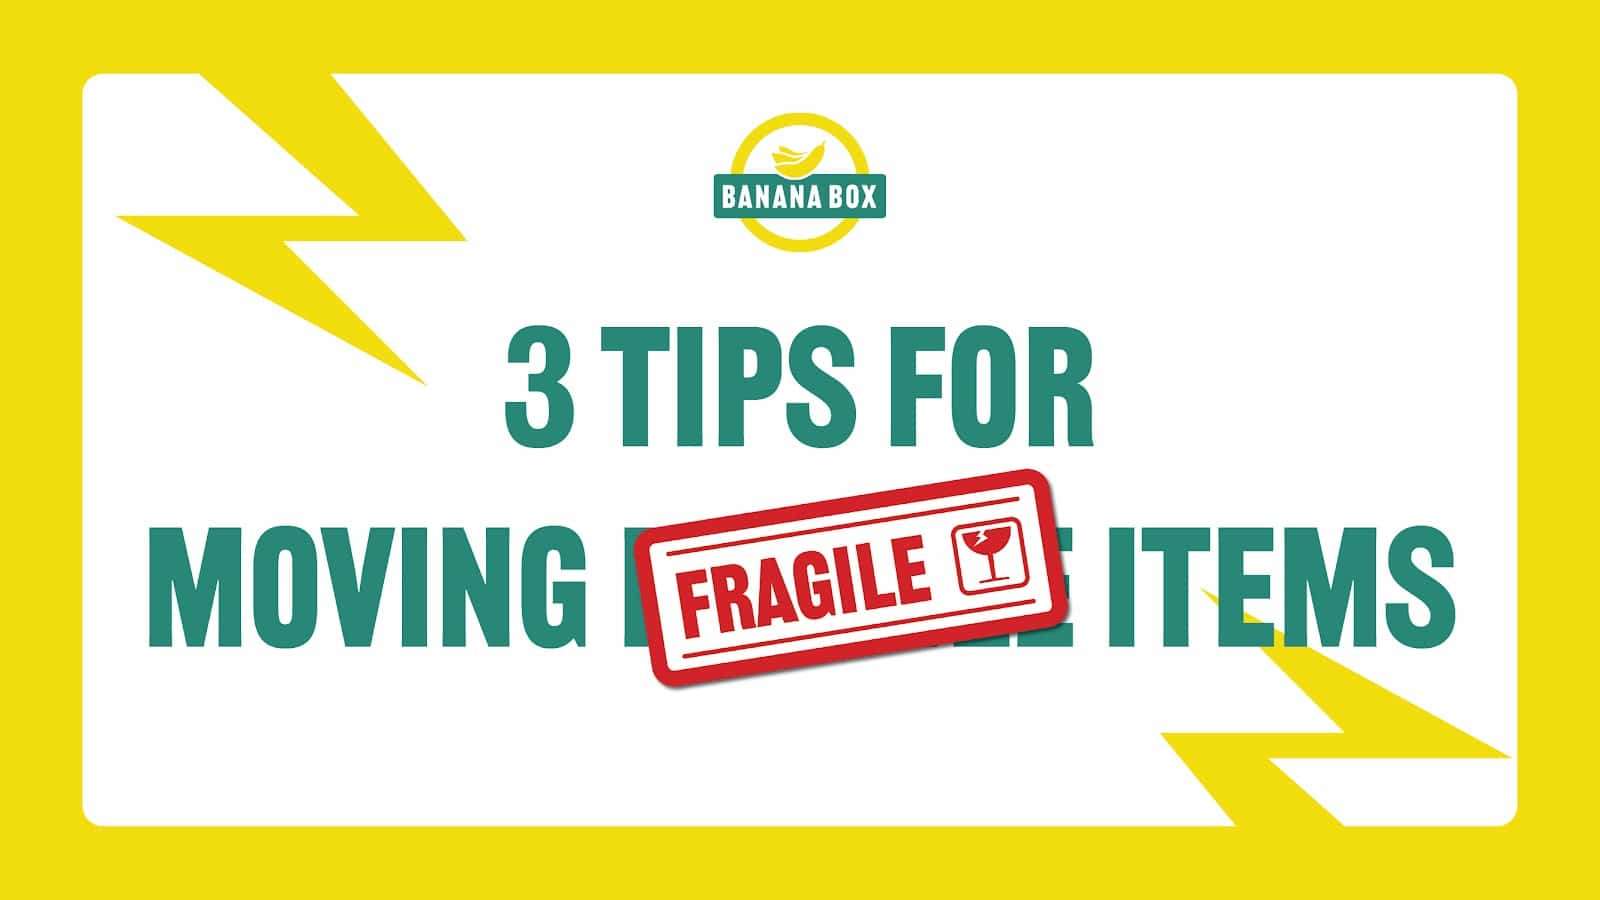 3 Tips for Moving Fragile Items